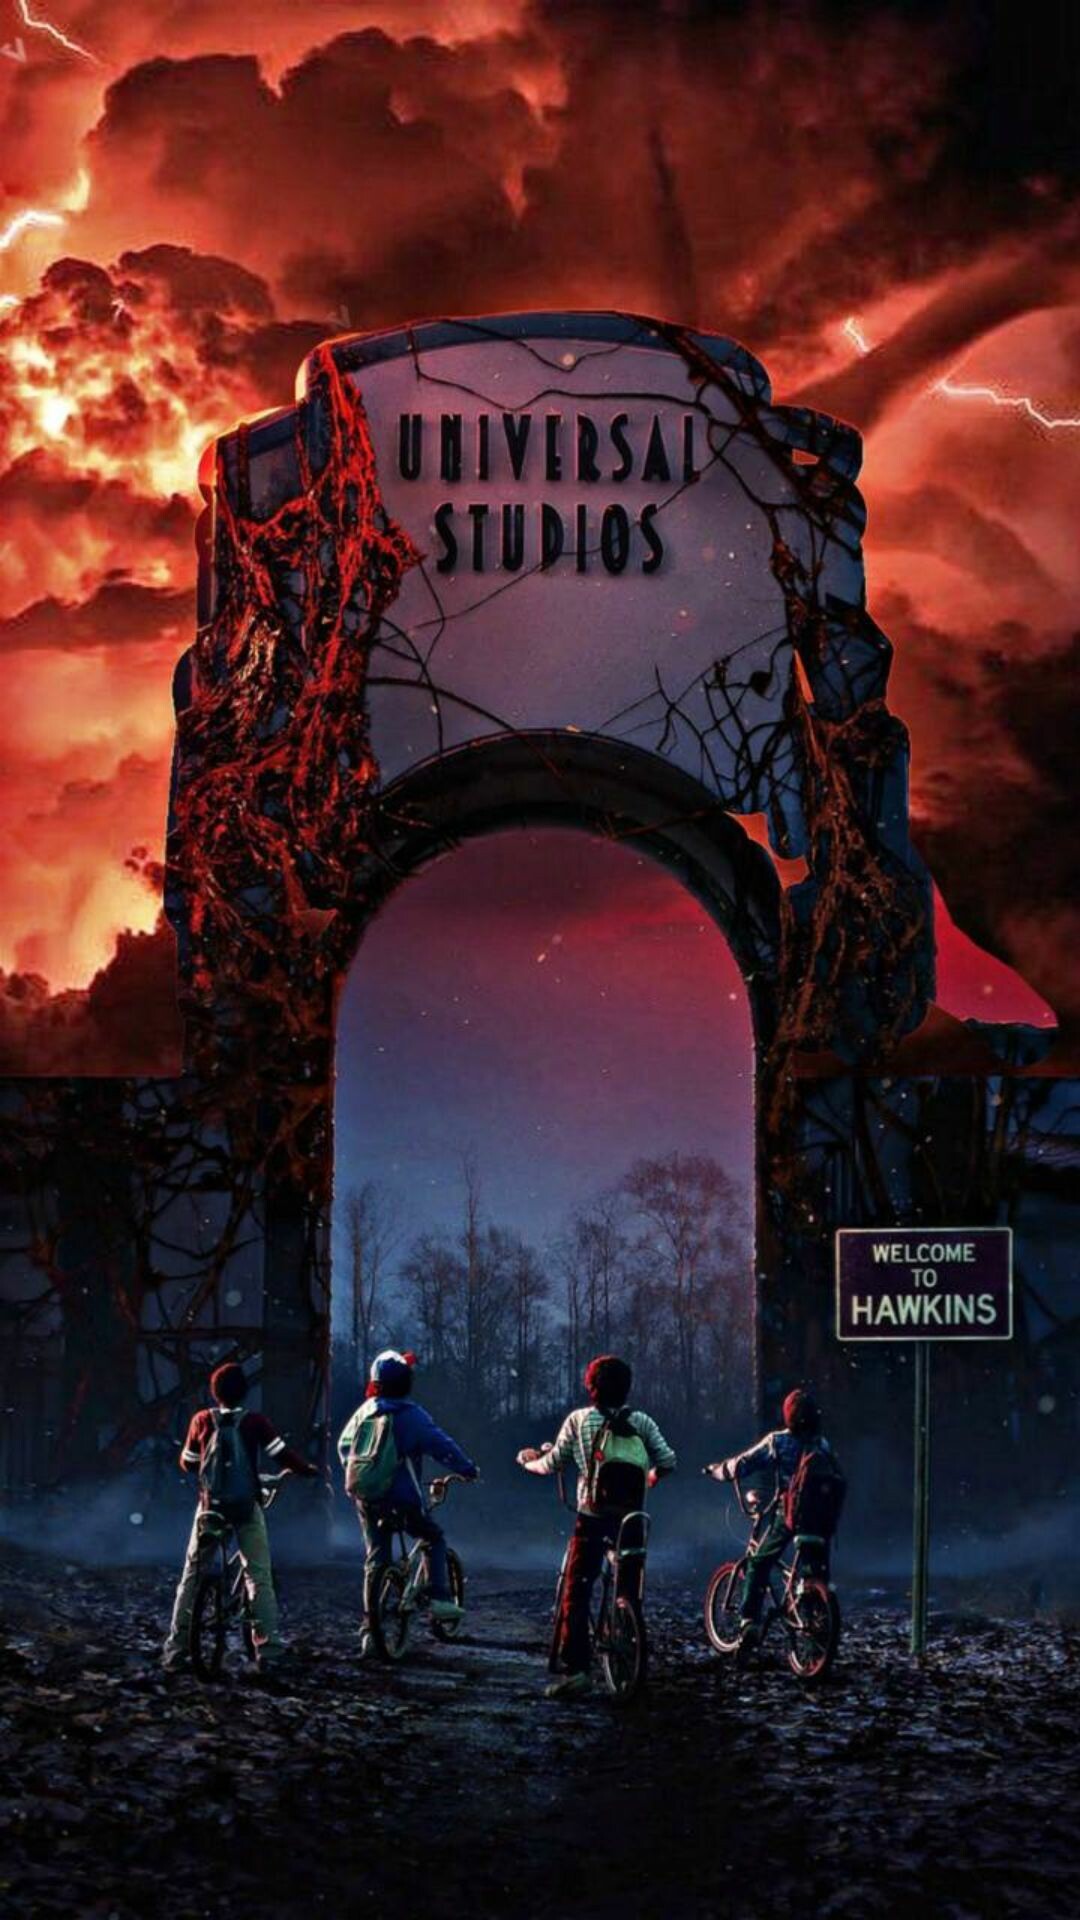 Stranger Things: Welcome to Hawkins, The first season follows the investigation of the disappearance of Will Byers. 1080x1920 Full HD Background.